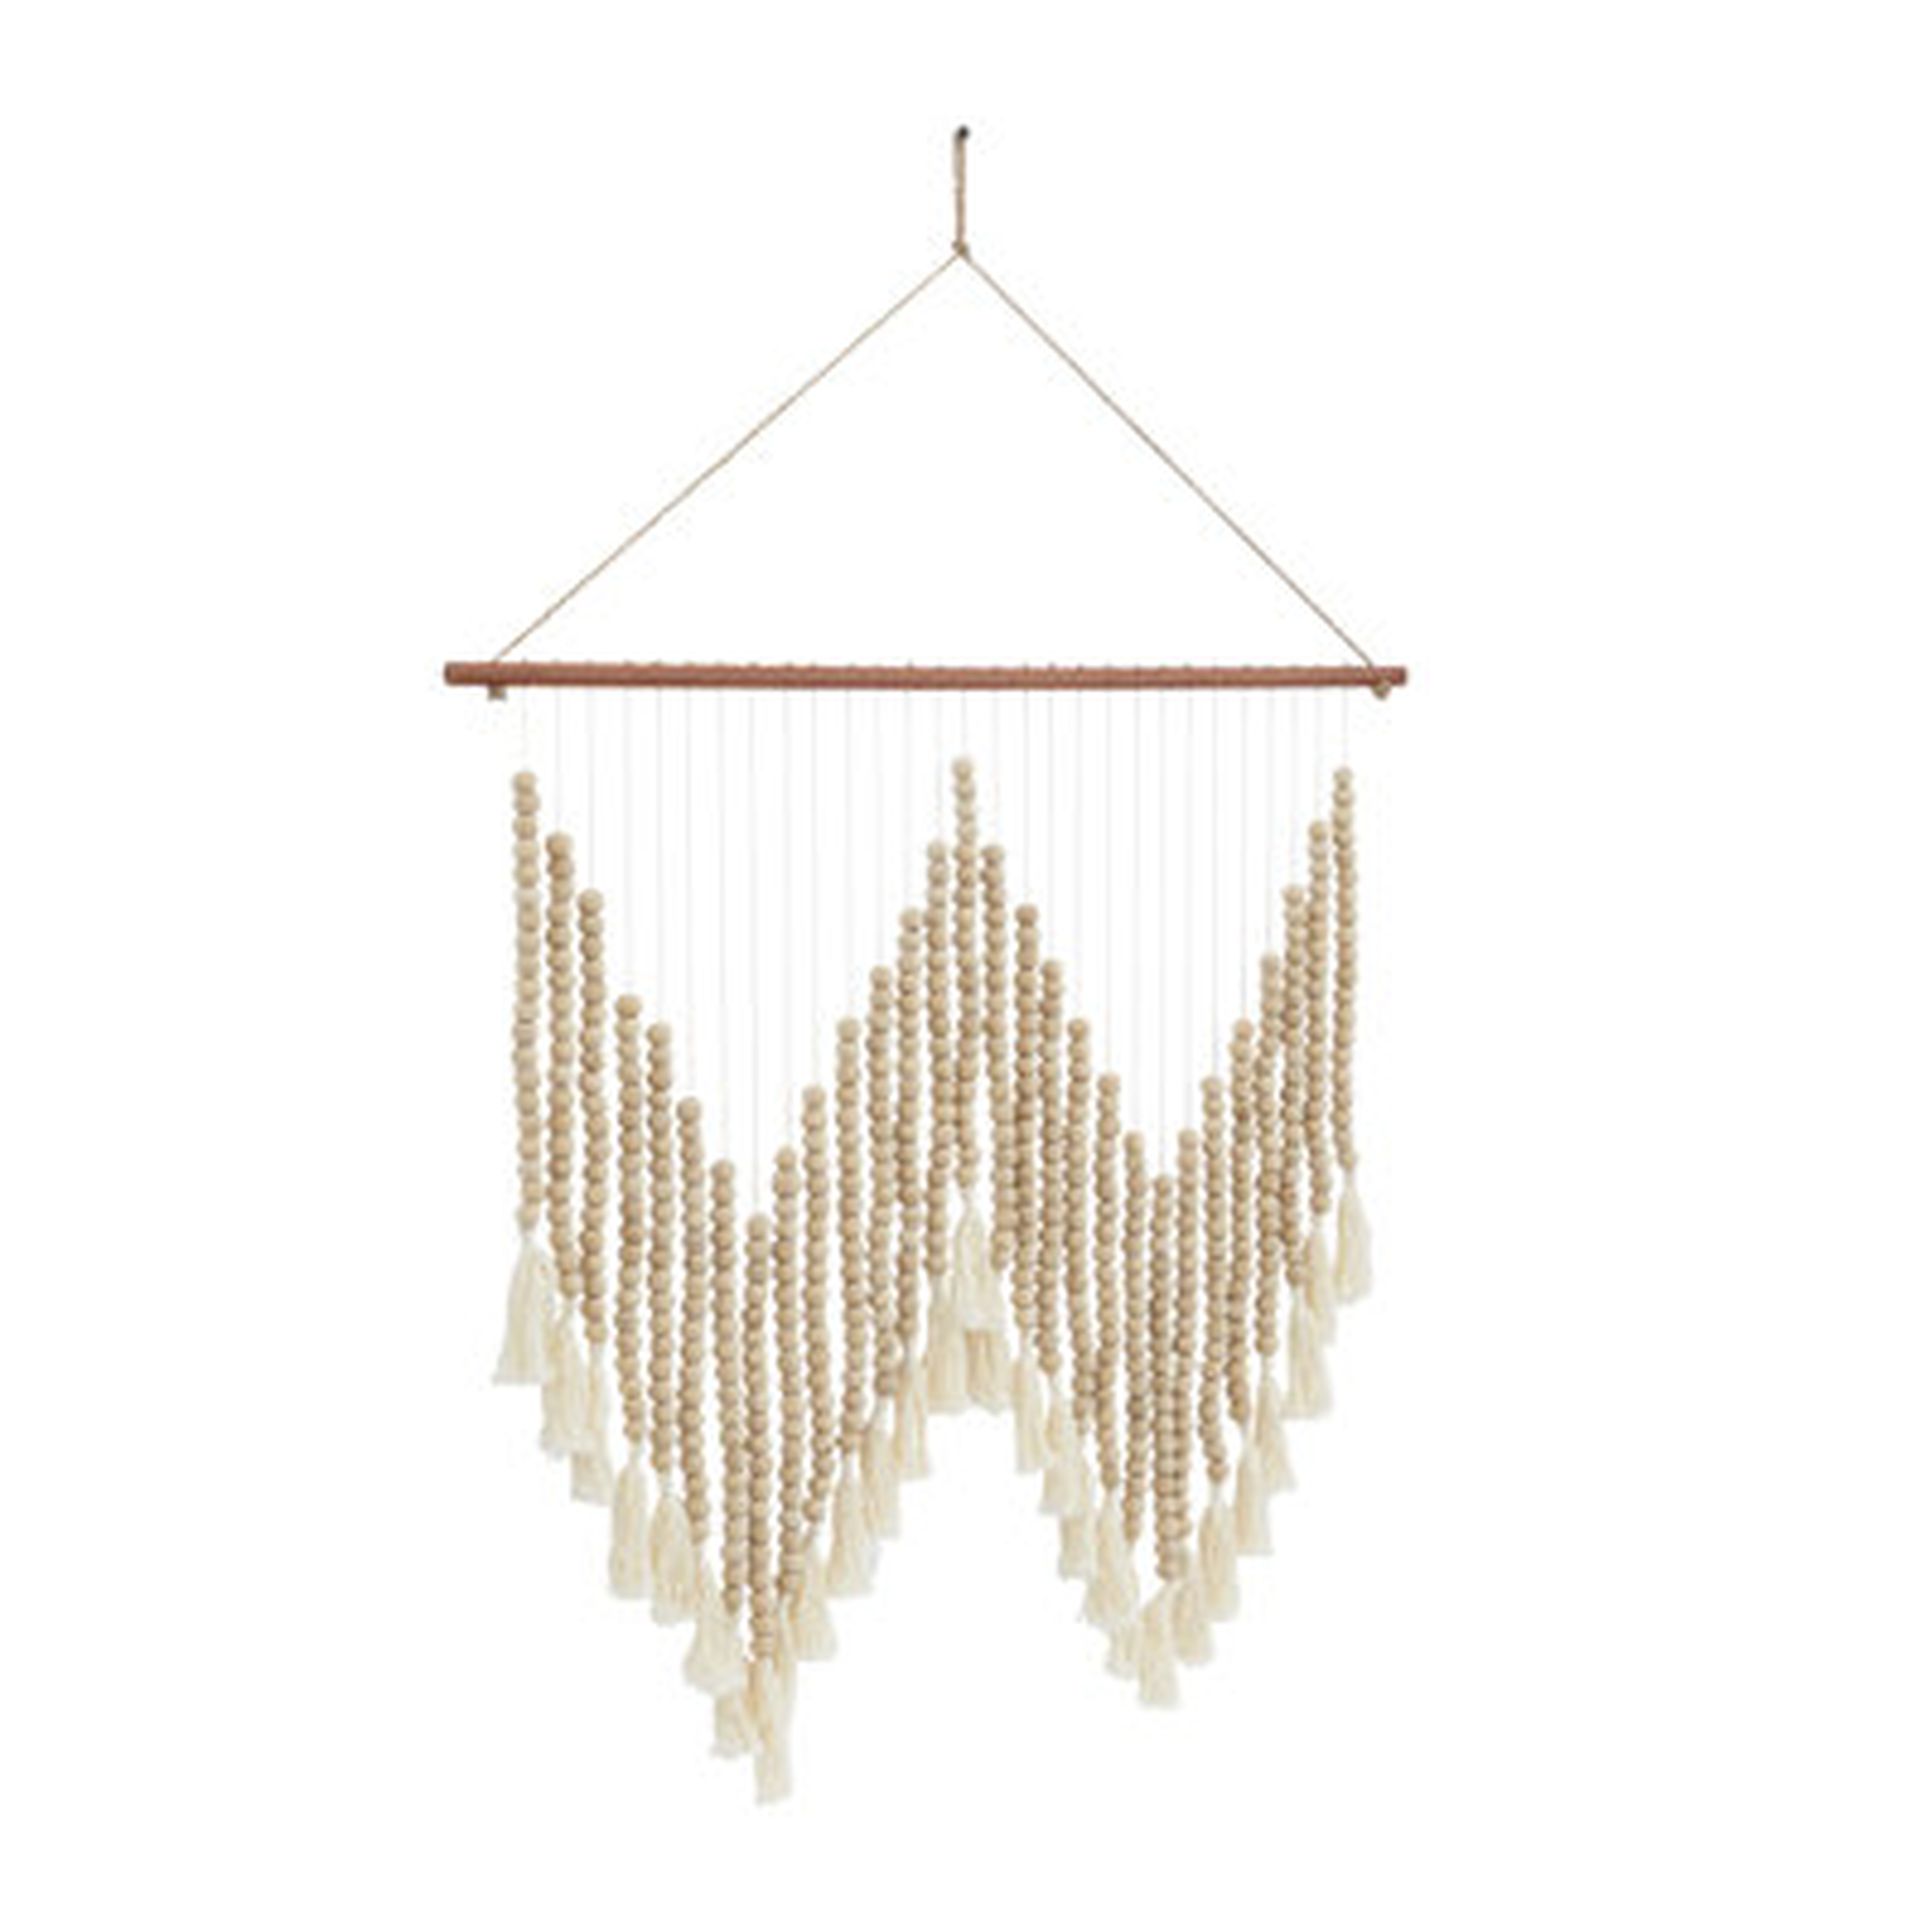 Fabric/Wood Wall Hanging with Rod - AllModern